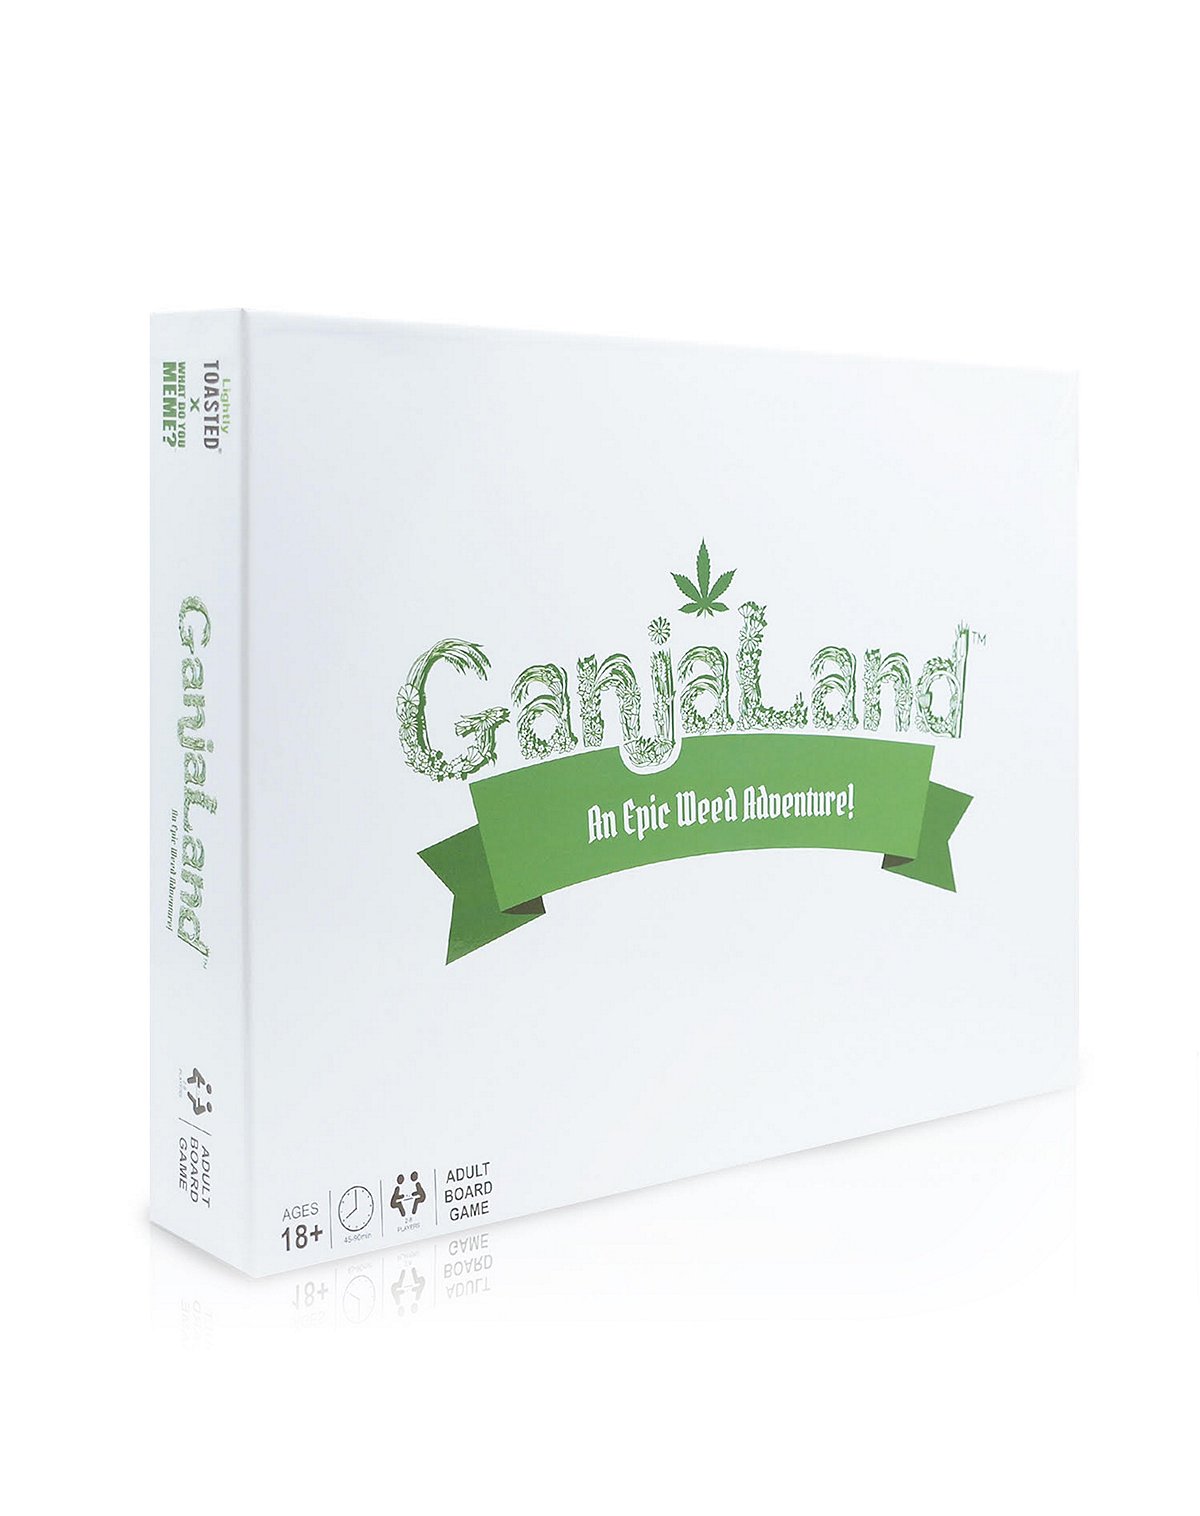 Ganjaland an Epic Weed Adventure – What Do You Meme